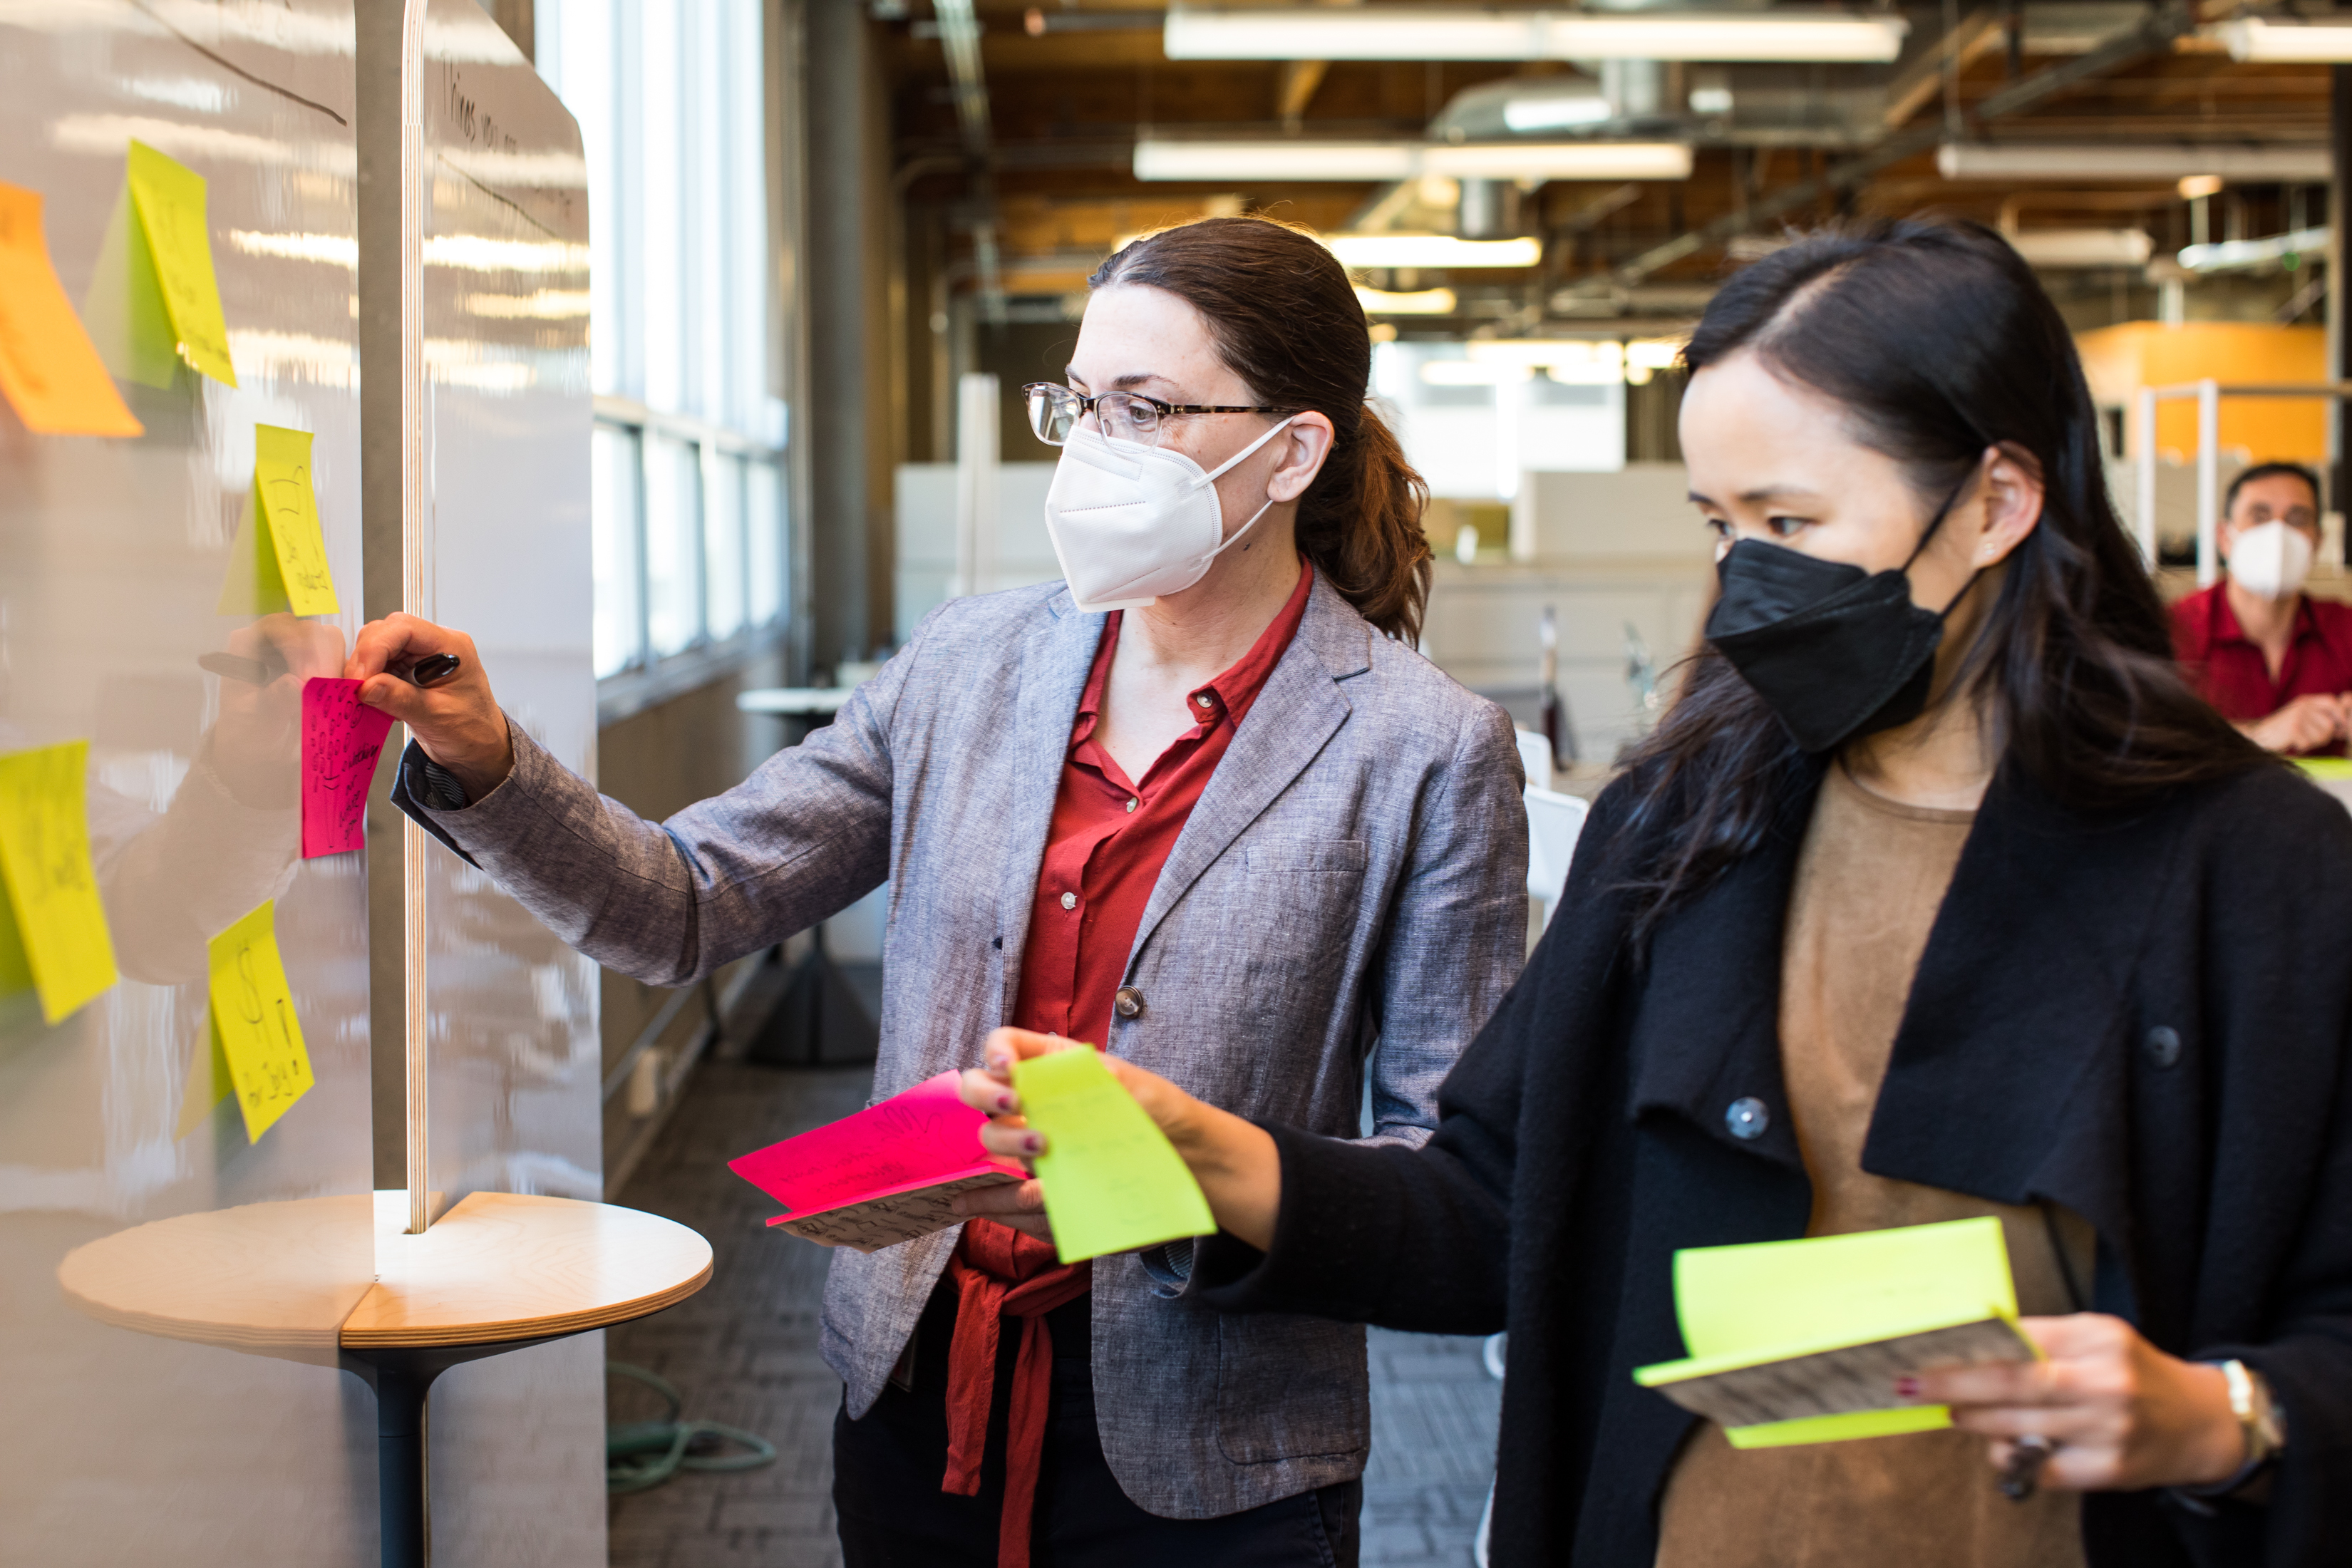 Two people wearing masks stand in front of a white board and apply sticky notes.